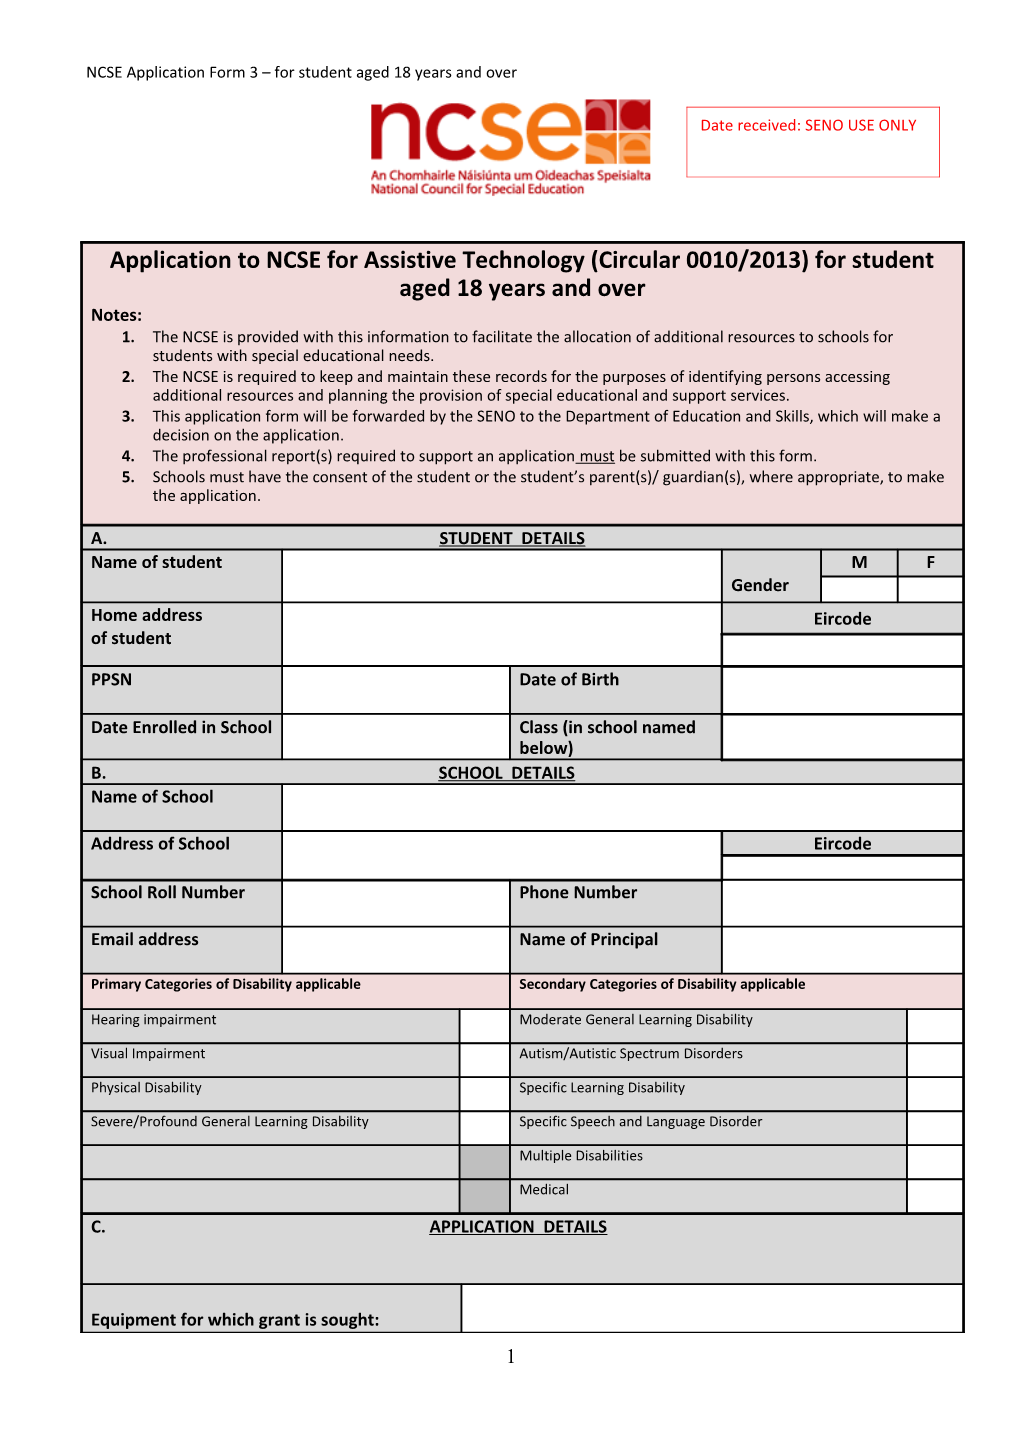 Application to NCSE for Access to Resources